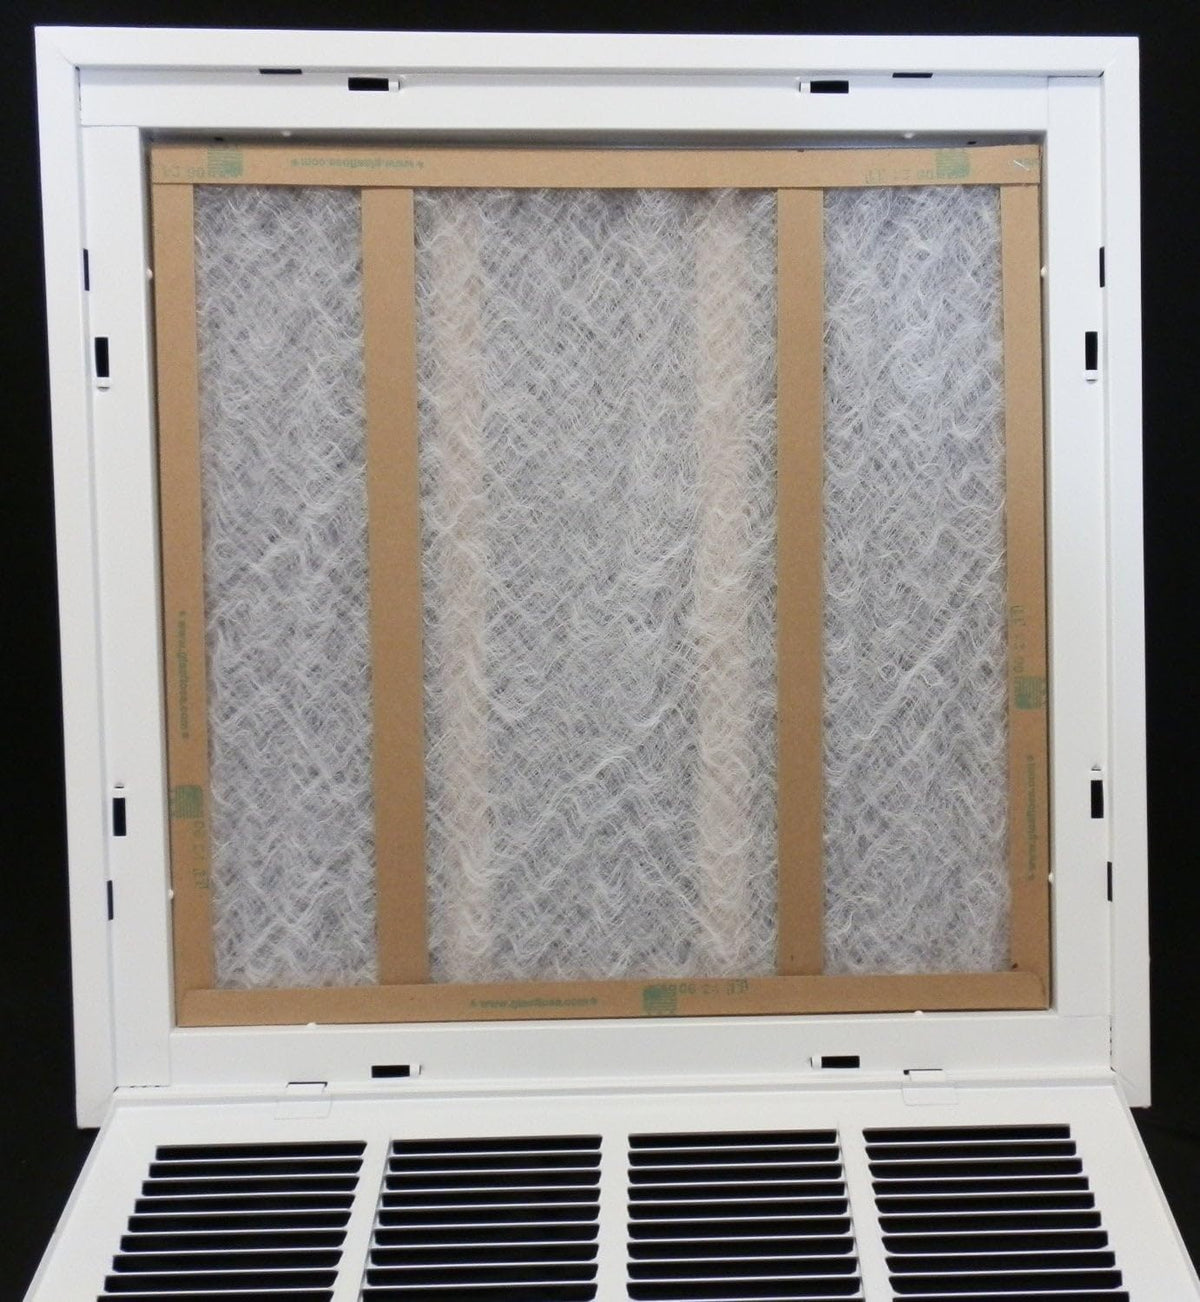 12&quot; X 28&quot; Steel Return Air Filter Grille for 1&quot; Filter - Removable Frame - [Outer Dimensions: 14 5/8&quot; X 30 5/8&quot;]